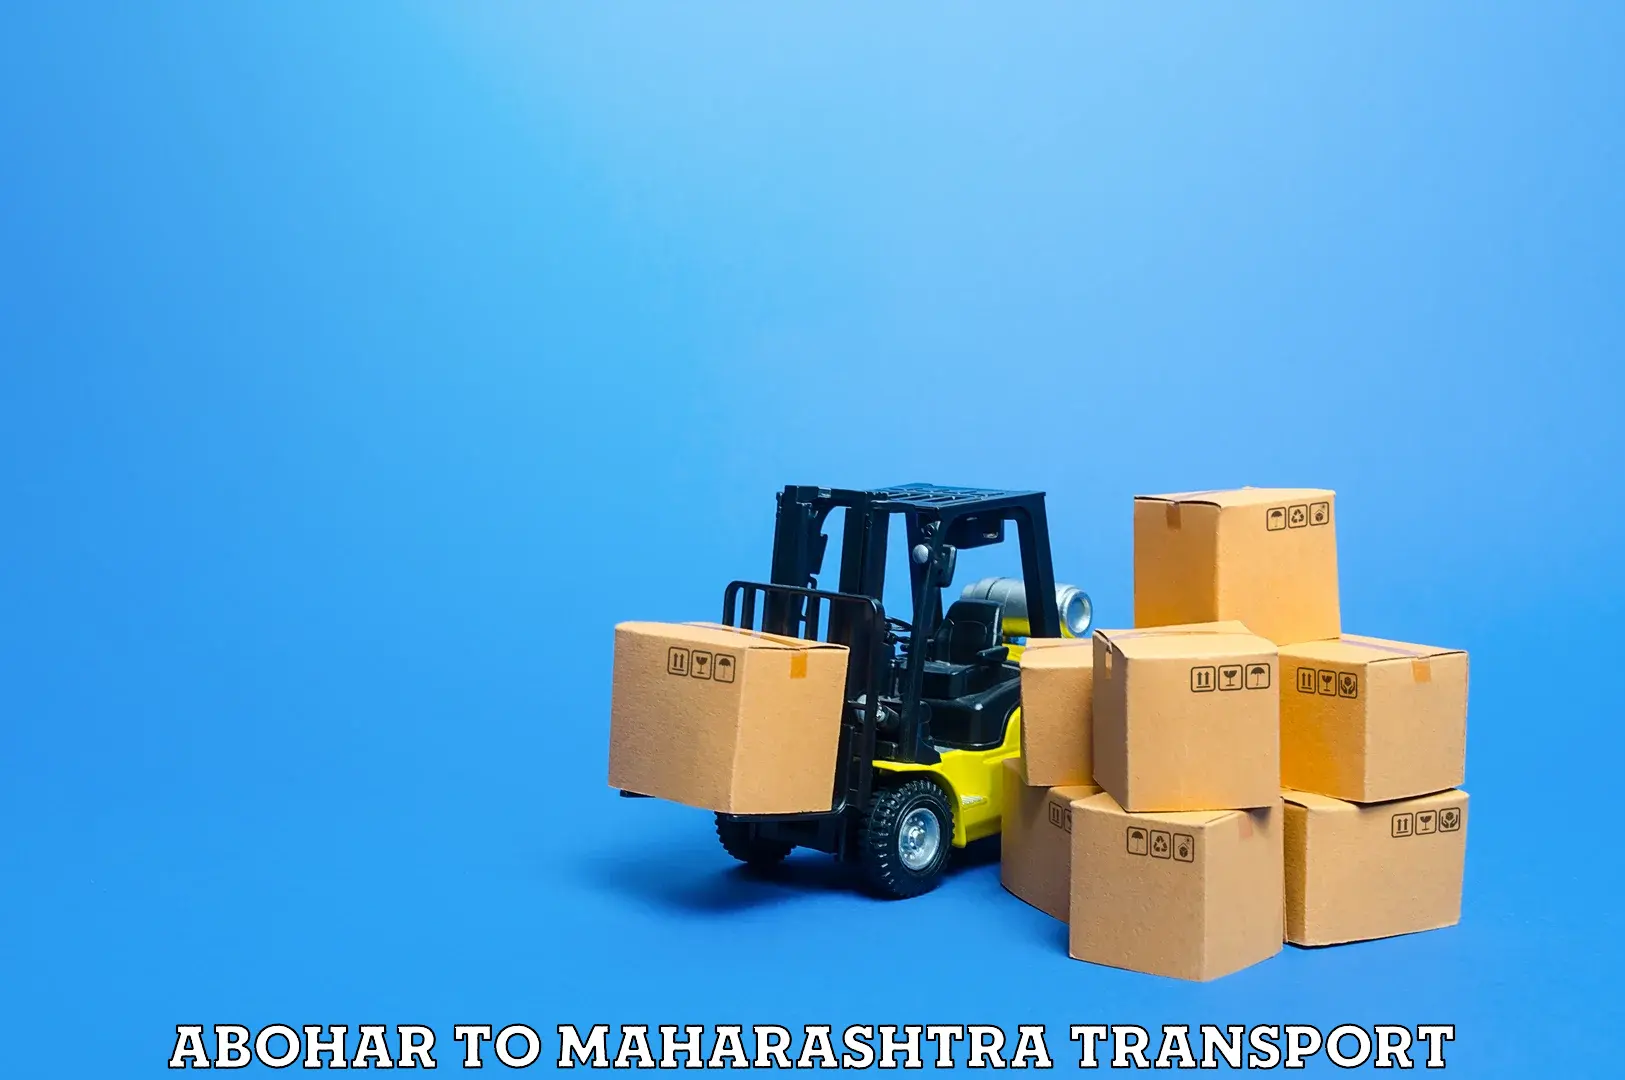 Truck transport companies in India Abohar to Akluj